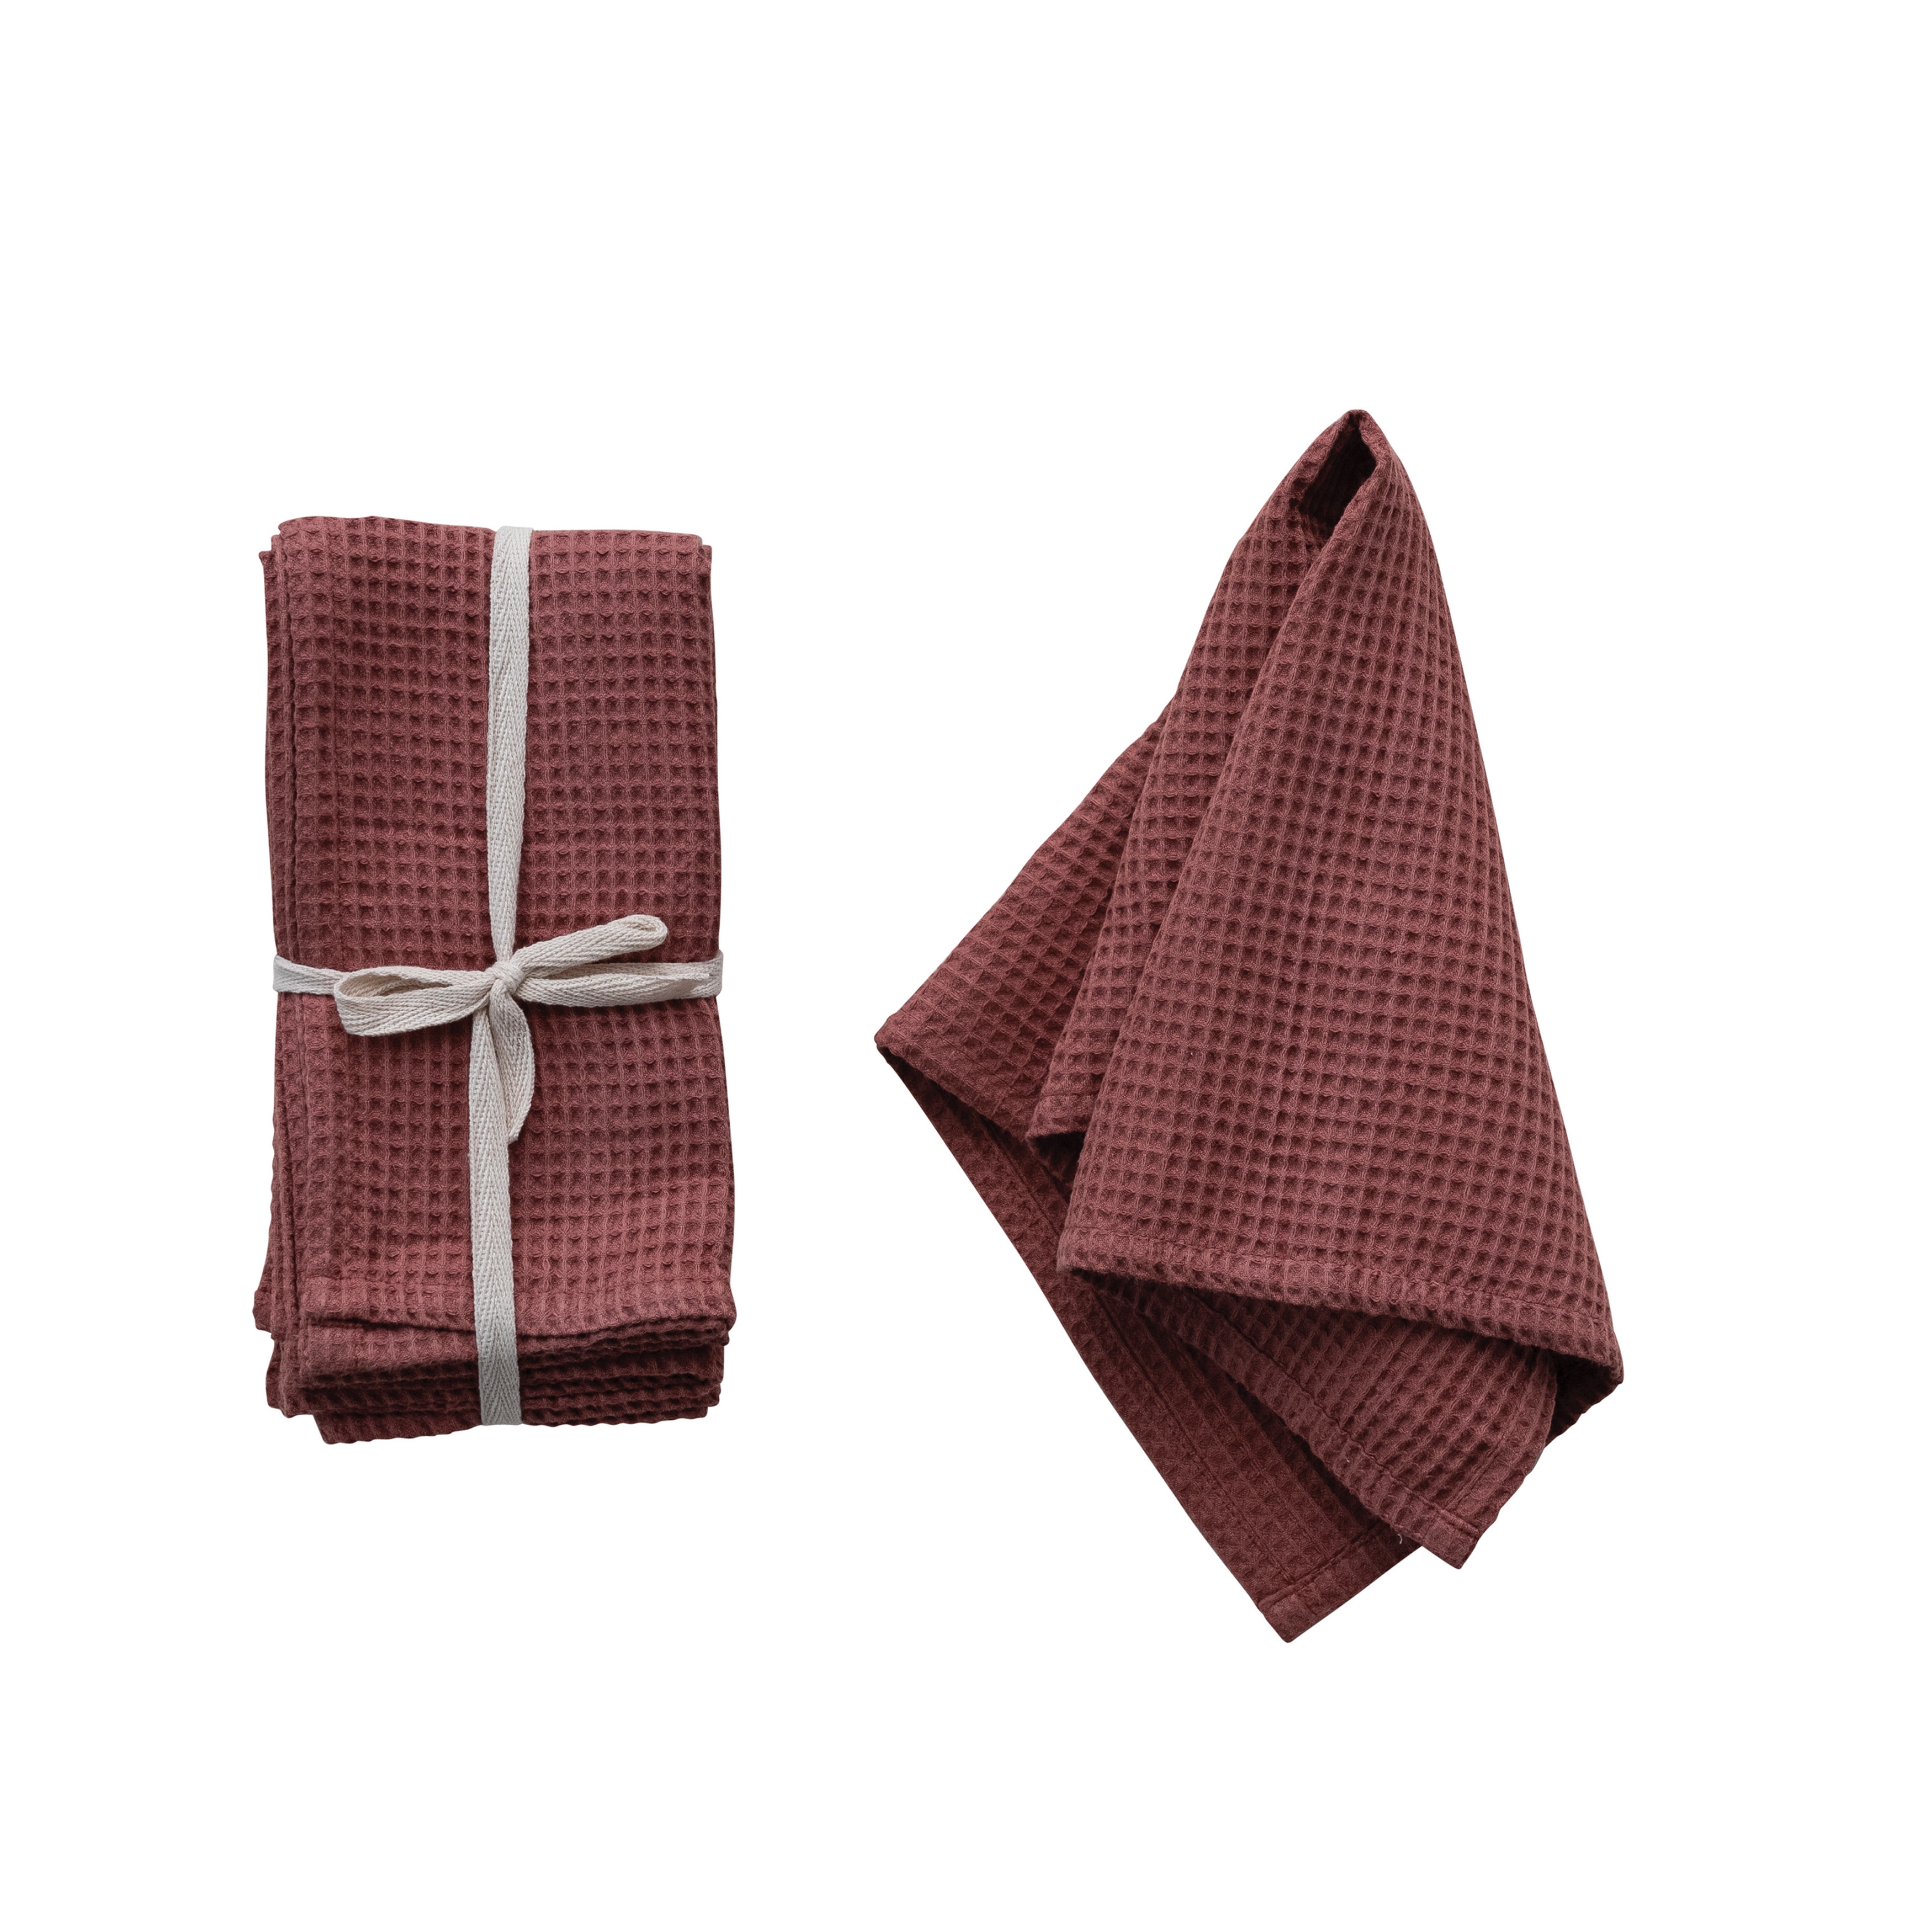 18 Inches Square Woven Linen and Cotton Waffle Dinner Napkins for Kitchen Use, Berry Color, Set of 4 - Image 0